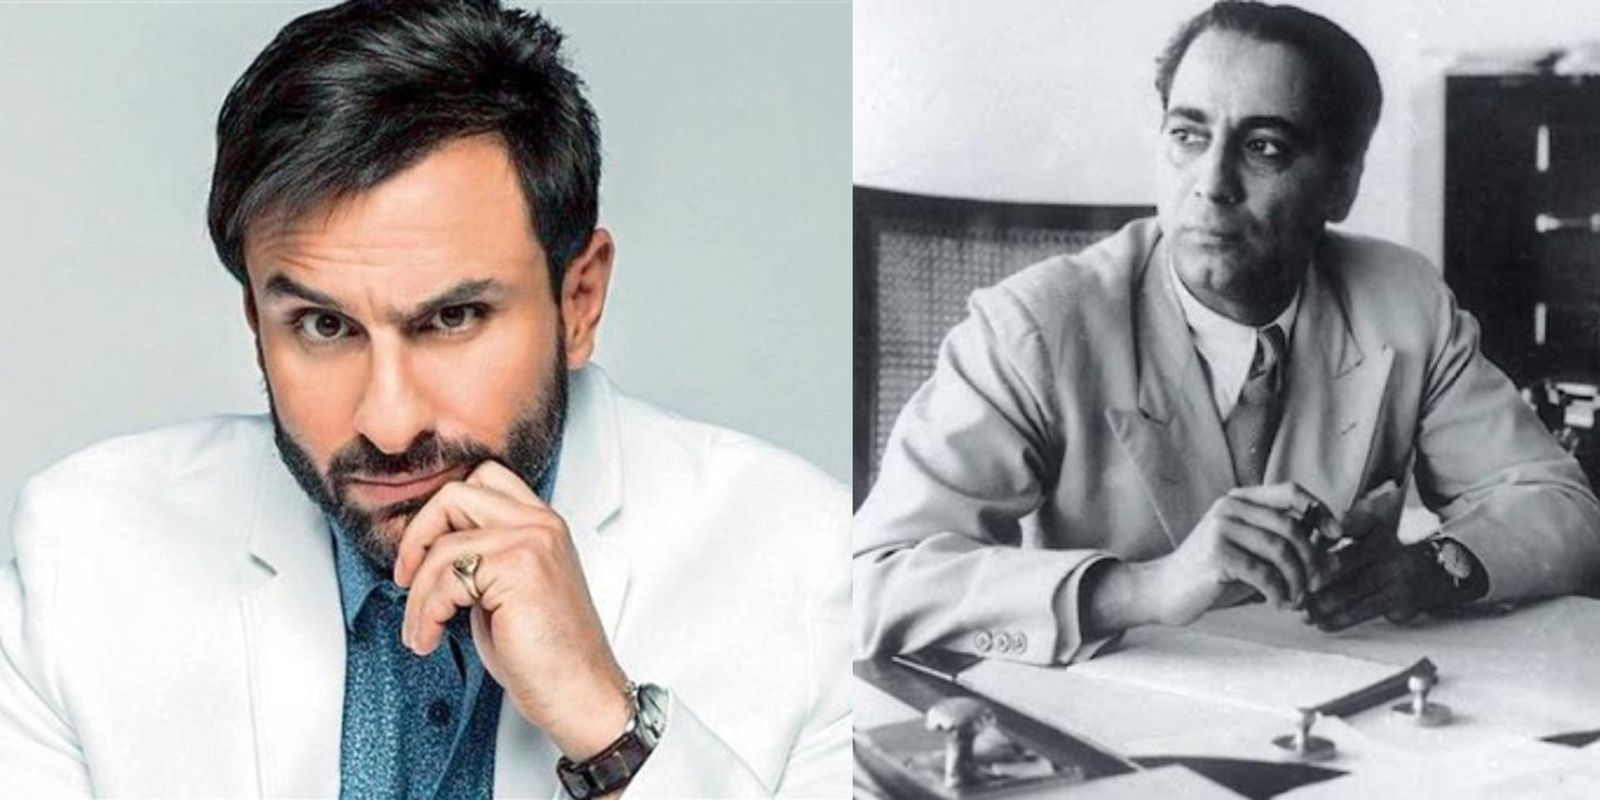 Saif Ali Khan To Play Nuclear Physicist Homi Bhabha In An Upcoming Film Titled ‘Assassination of Homi Bhabha’? Read Details...